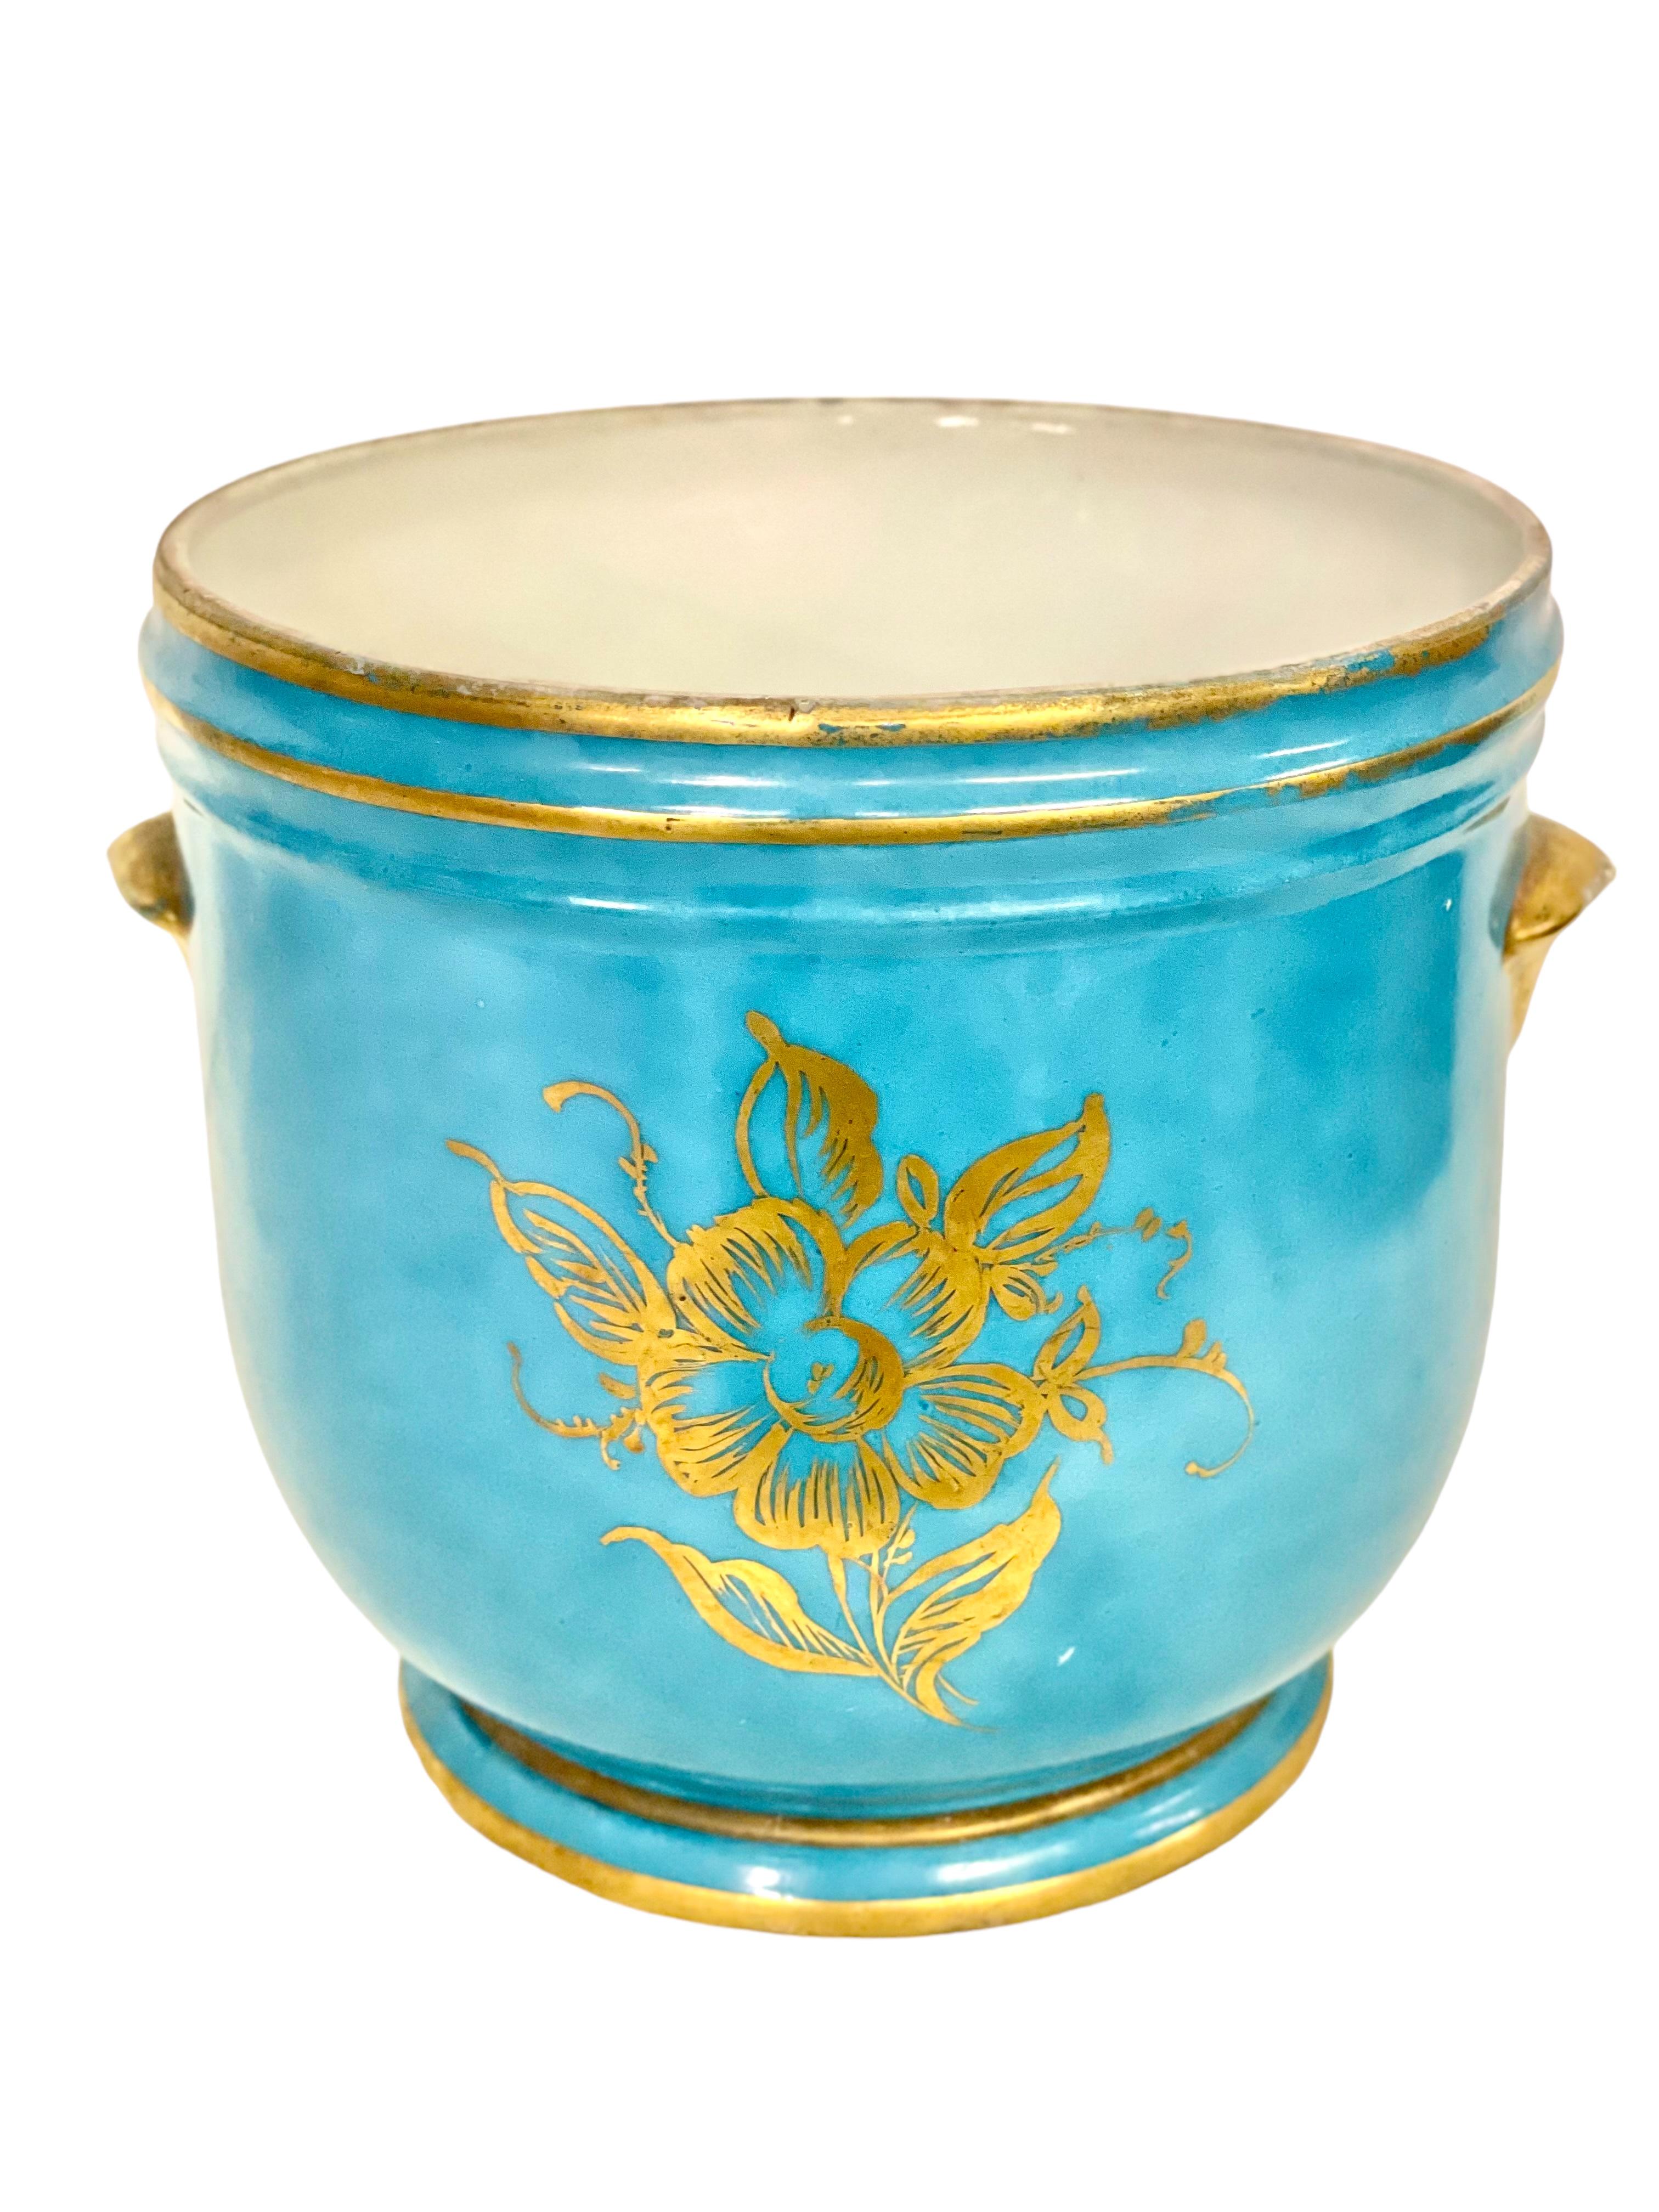 Napoleon III 19th Century Limoges Porcelain Cache Pot in a Sèvres Style For Sale